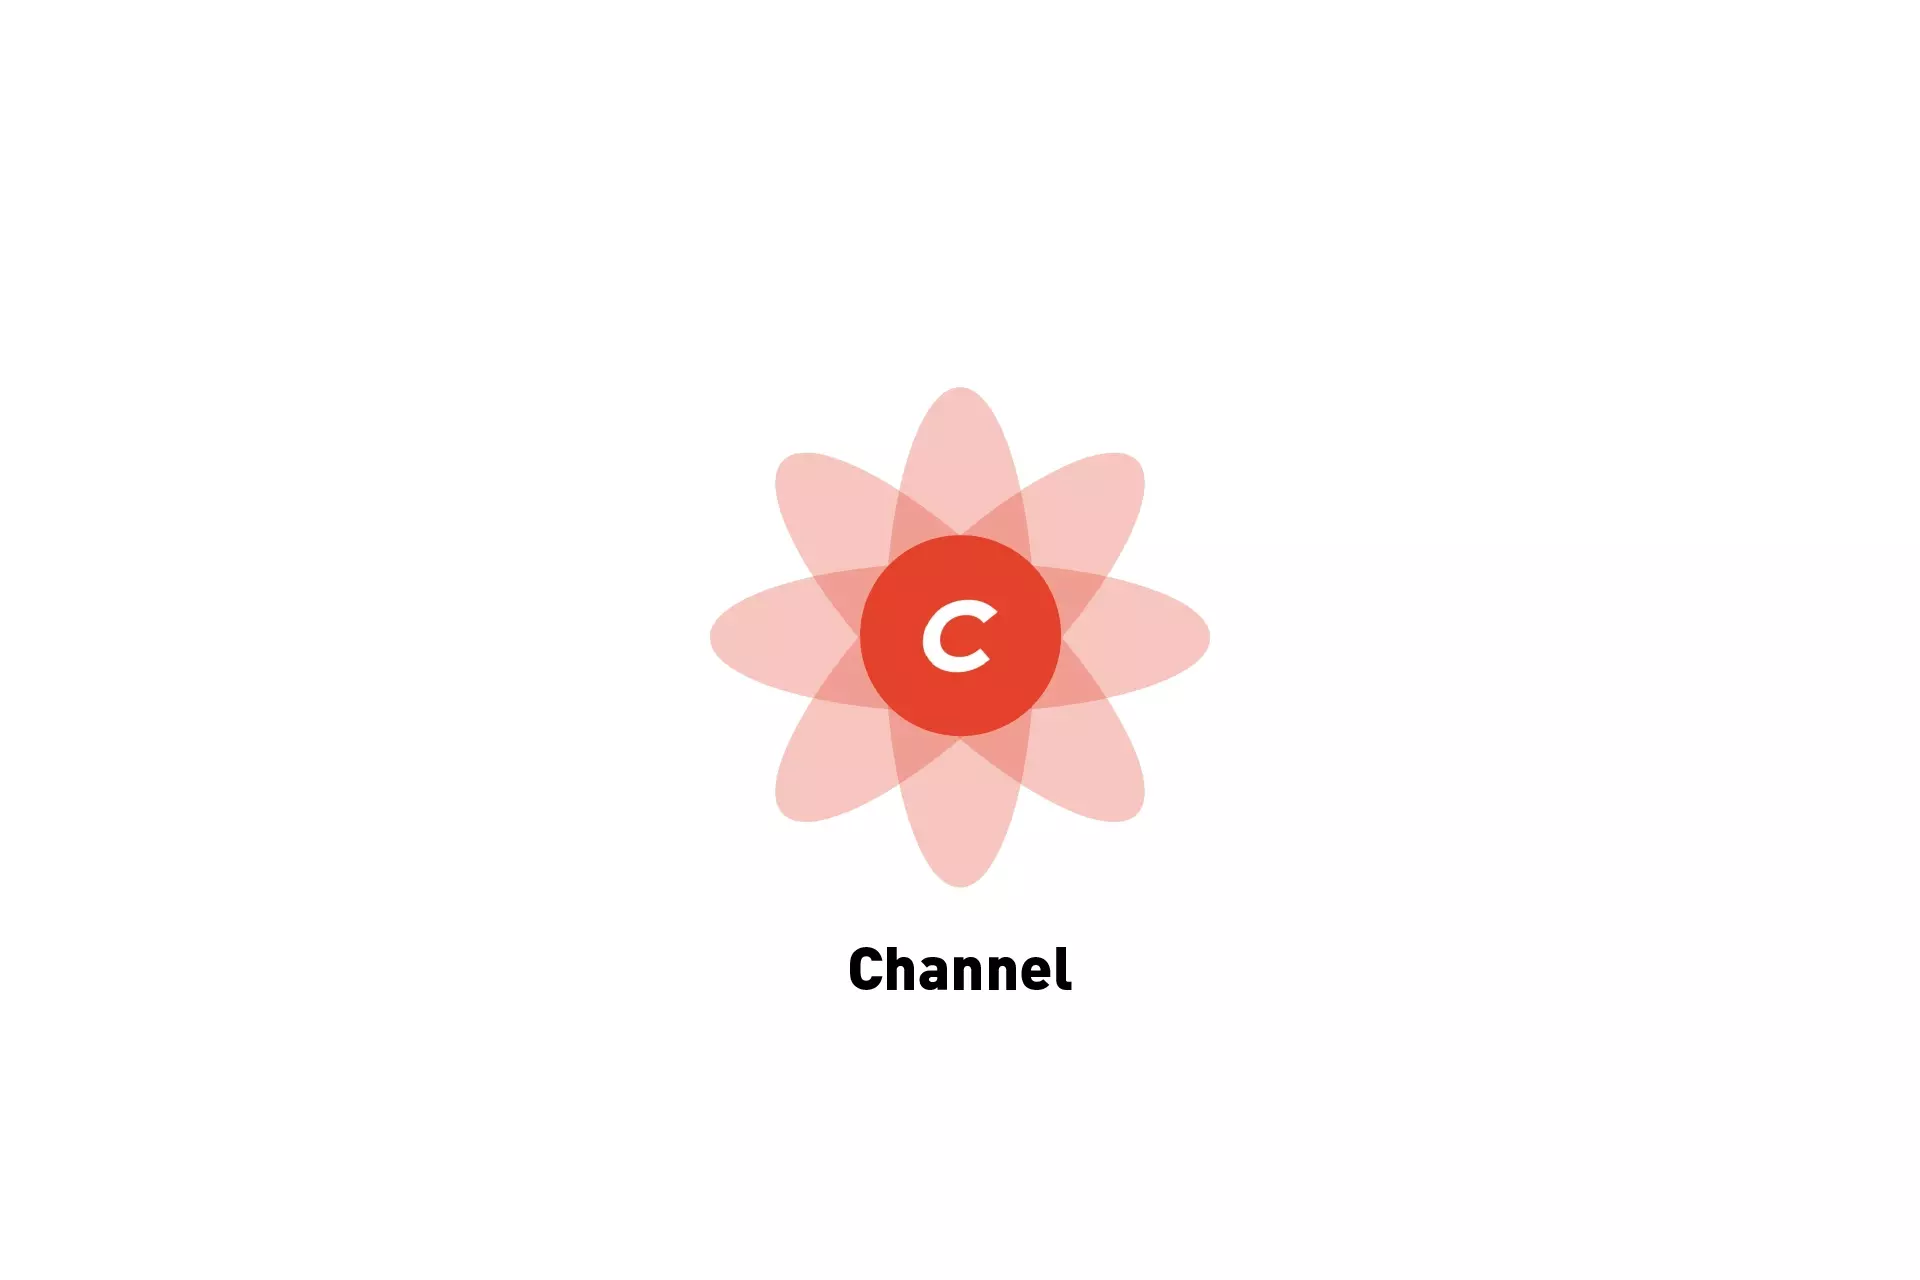 A flower that represents Craft CMS with the text "Channel" beneath it.